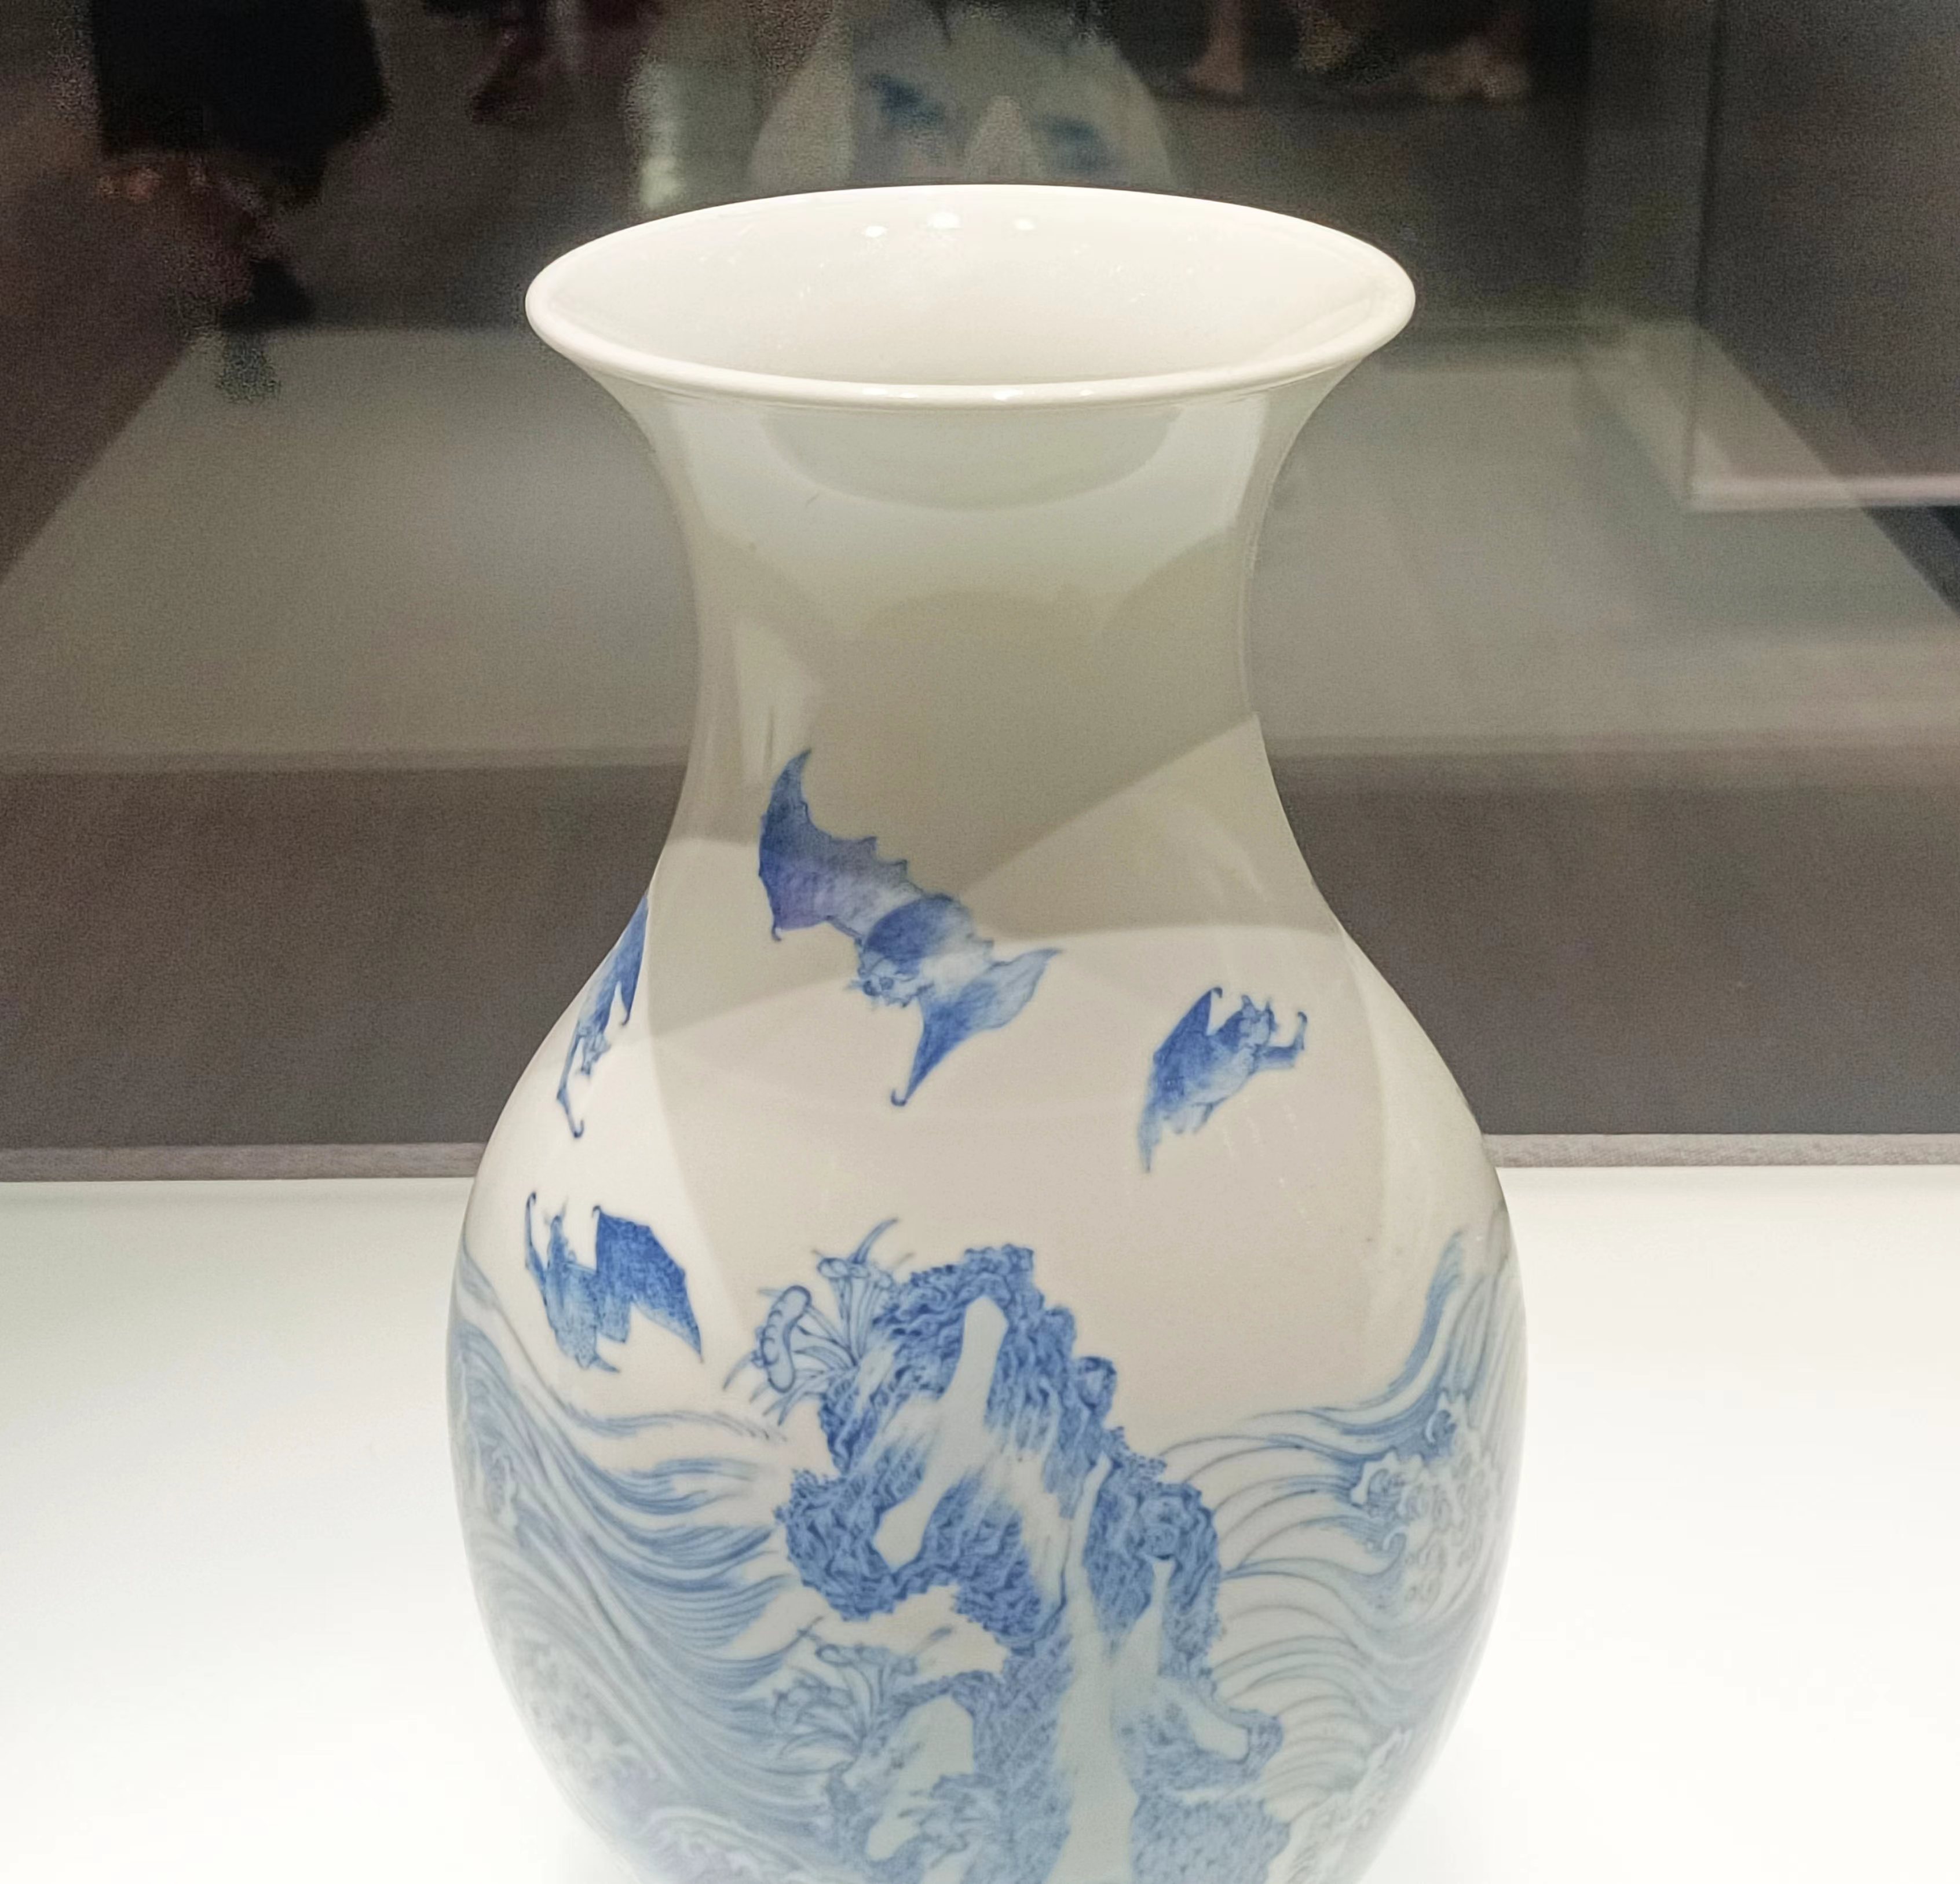 Meet the Museum(118) Blue and white pipa-shaped  vessel designed with seawater and bat pattern in the Republic of China